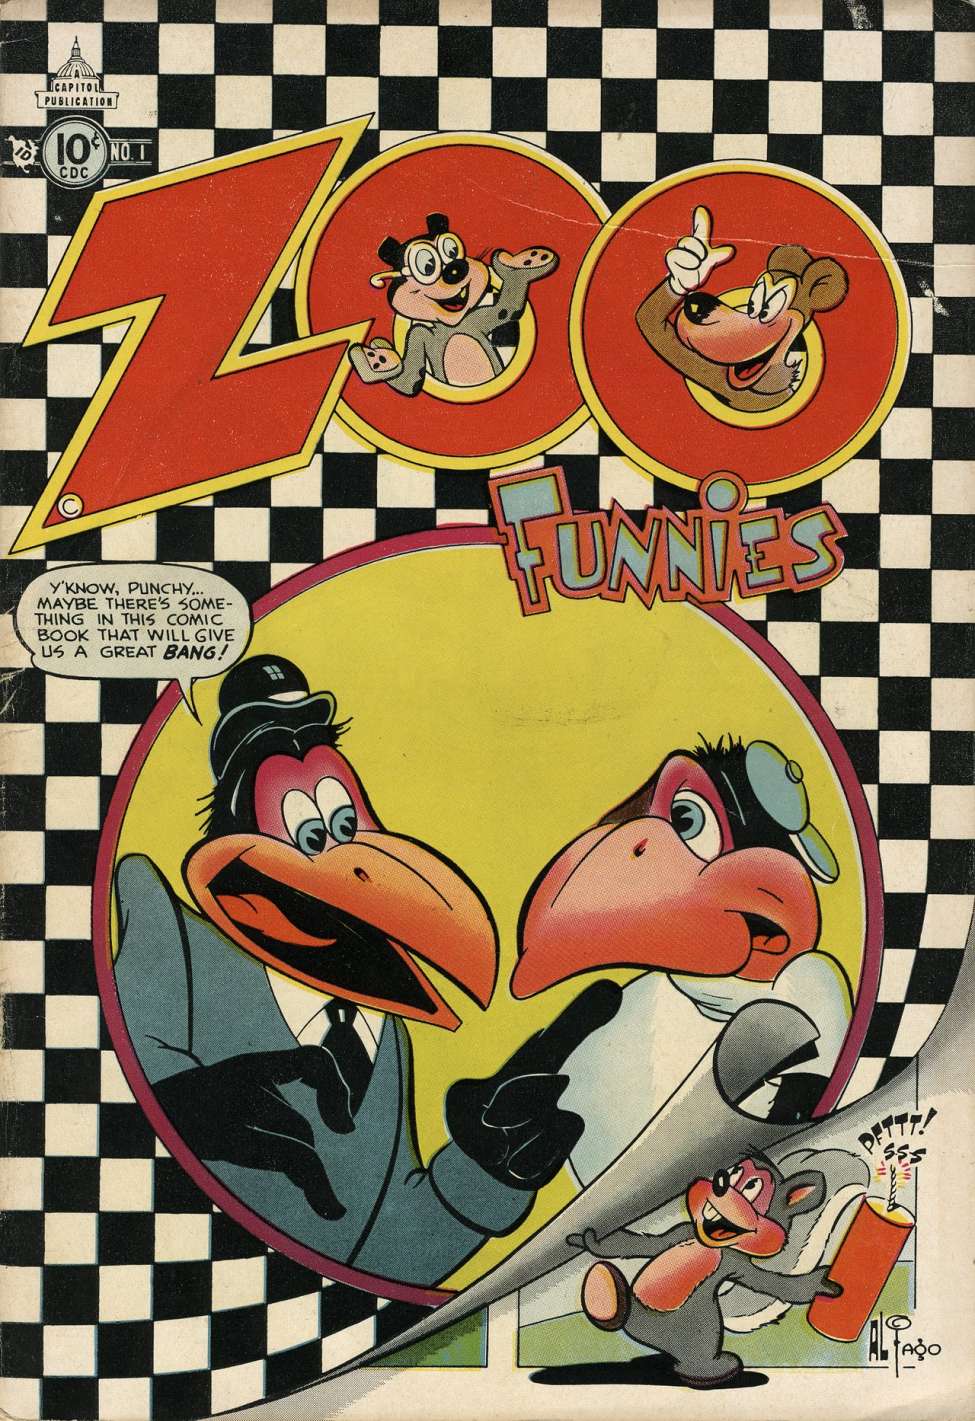 Comic Book Cover For Zoo Funnies v2 1